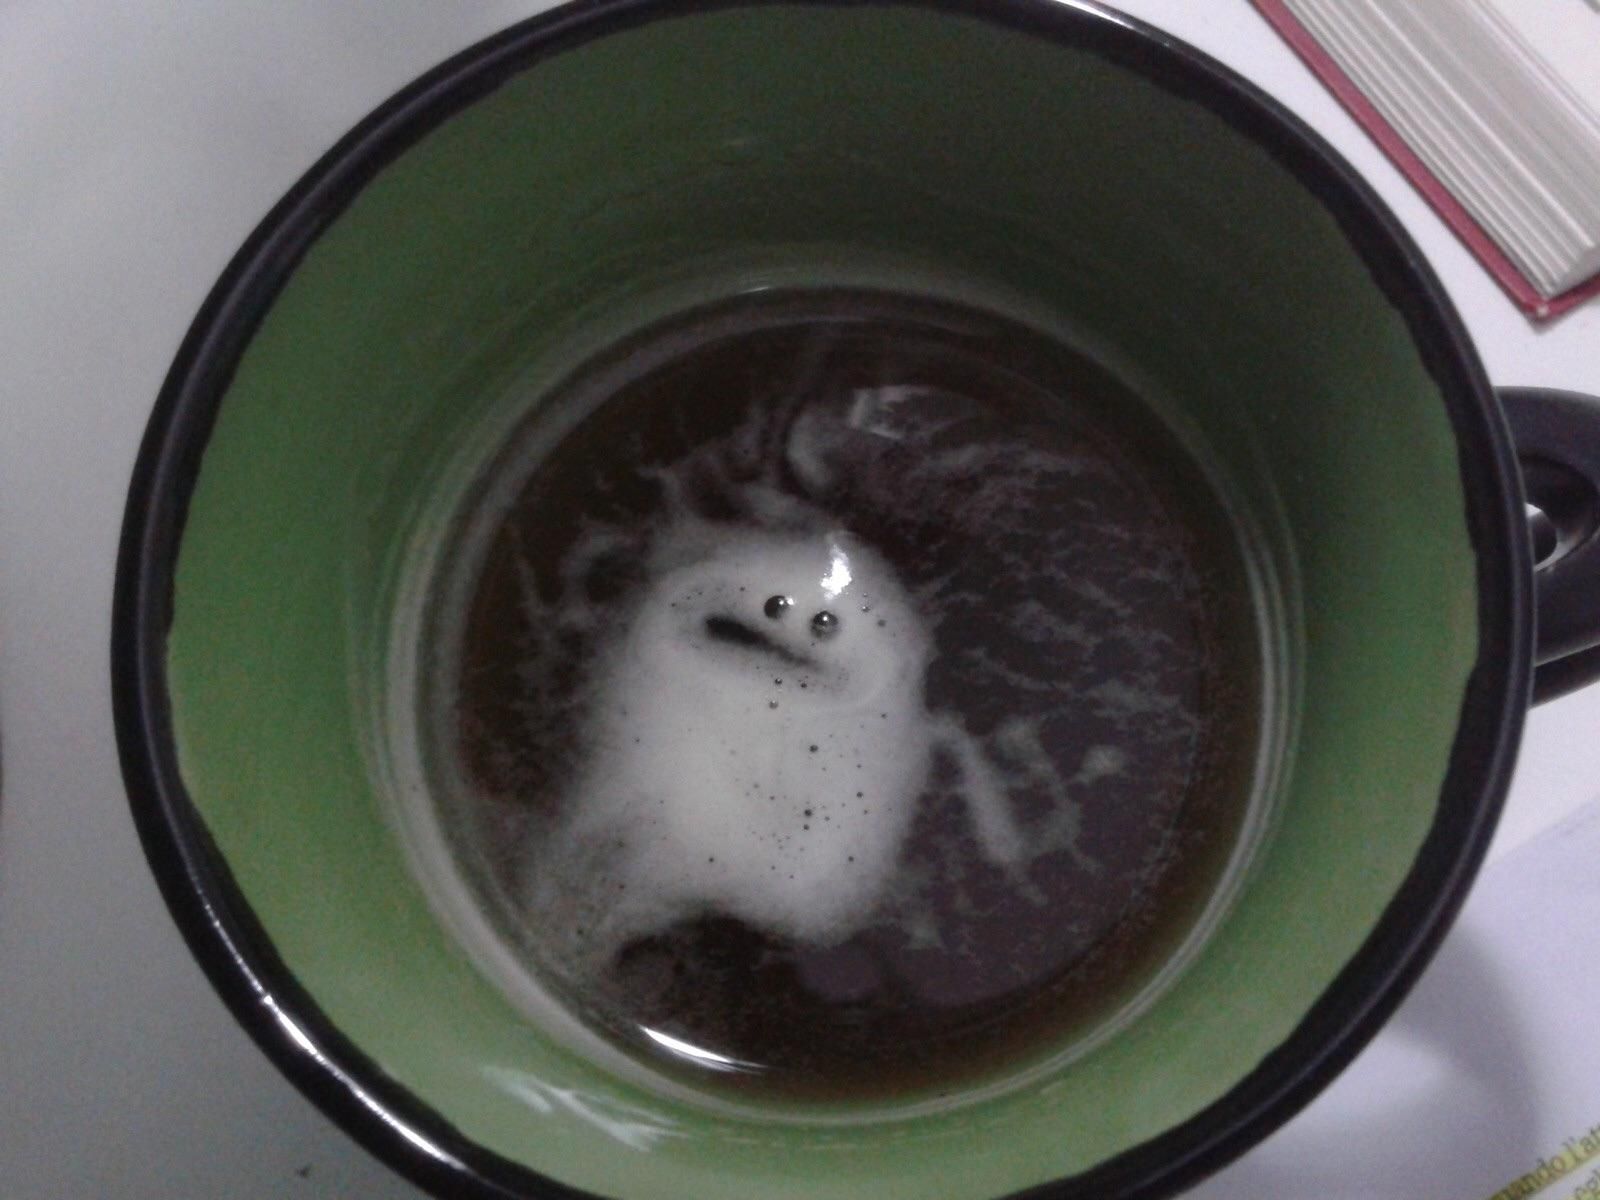 Found this lil ghost earlier today in my mug.